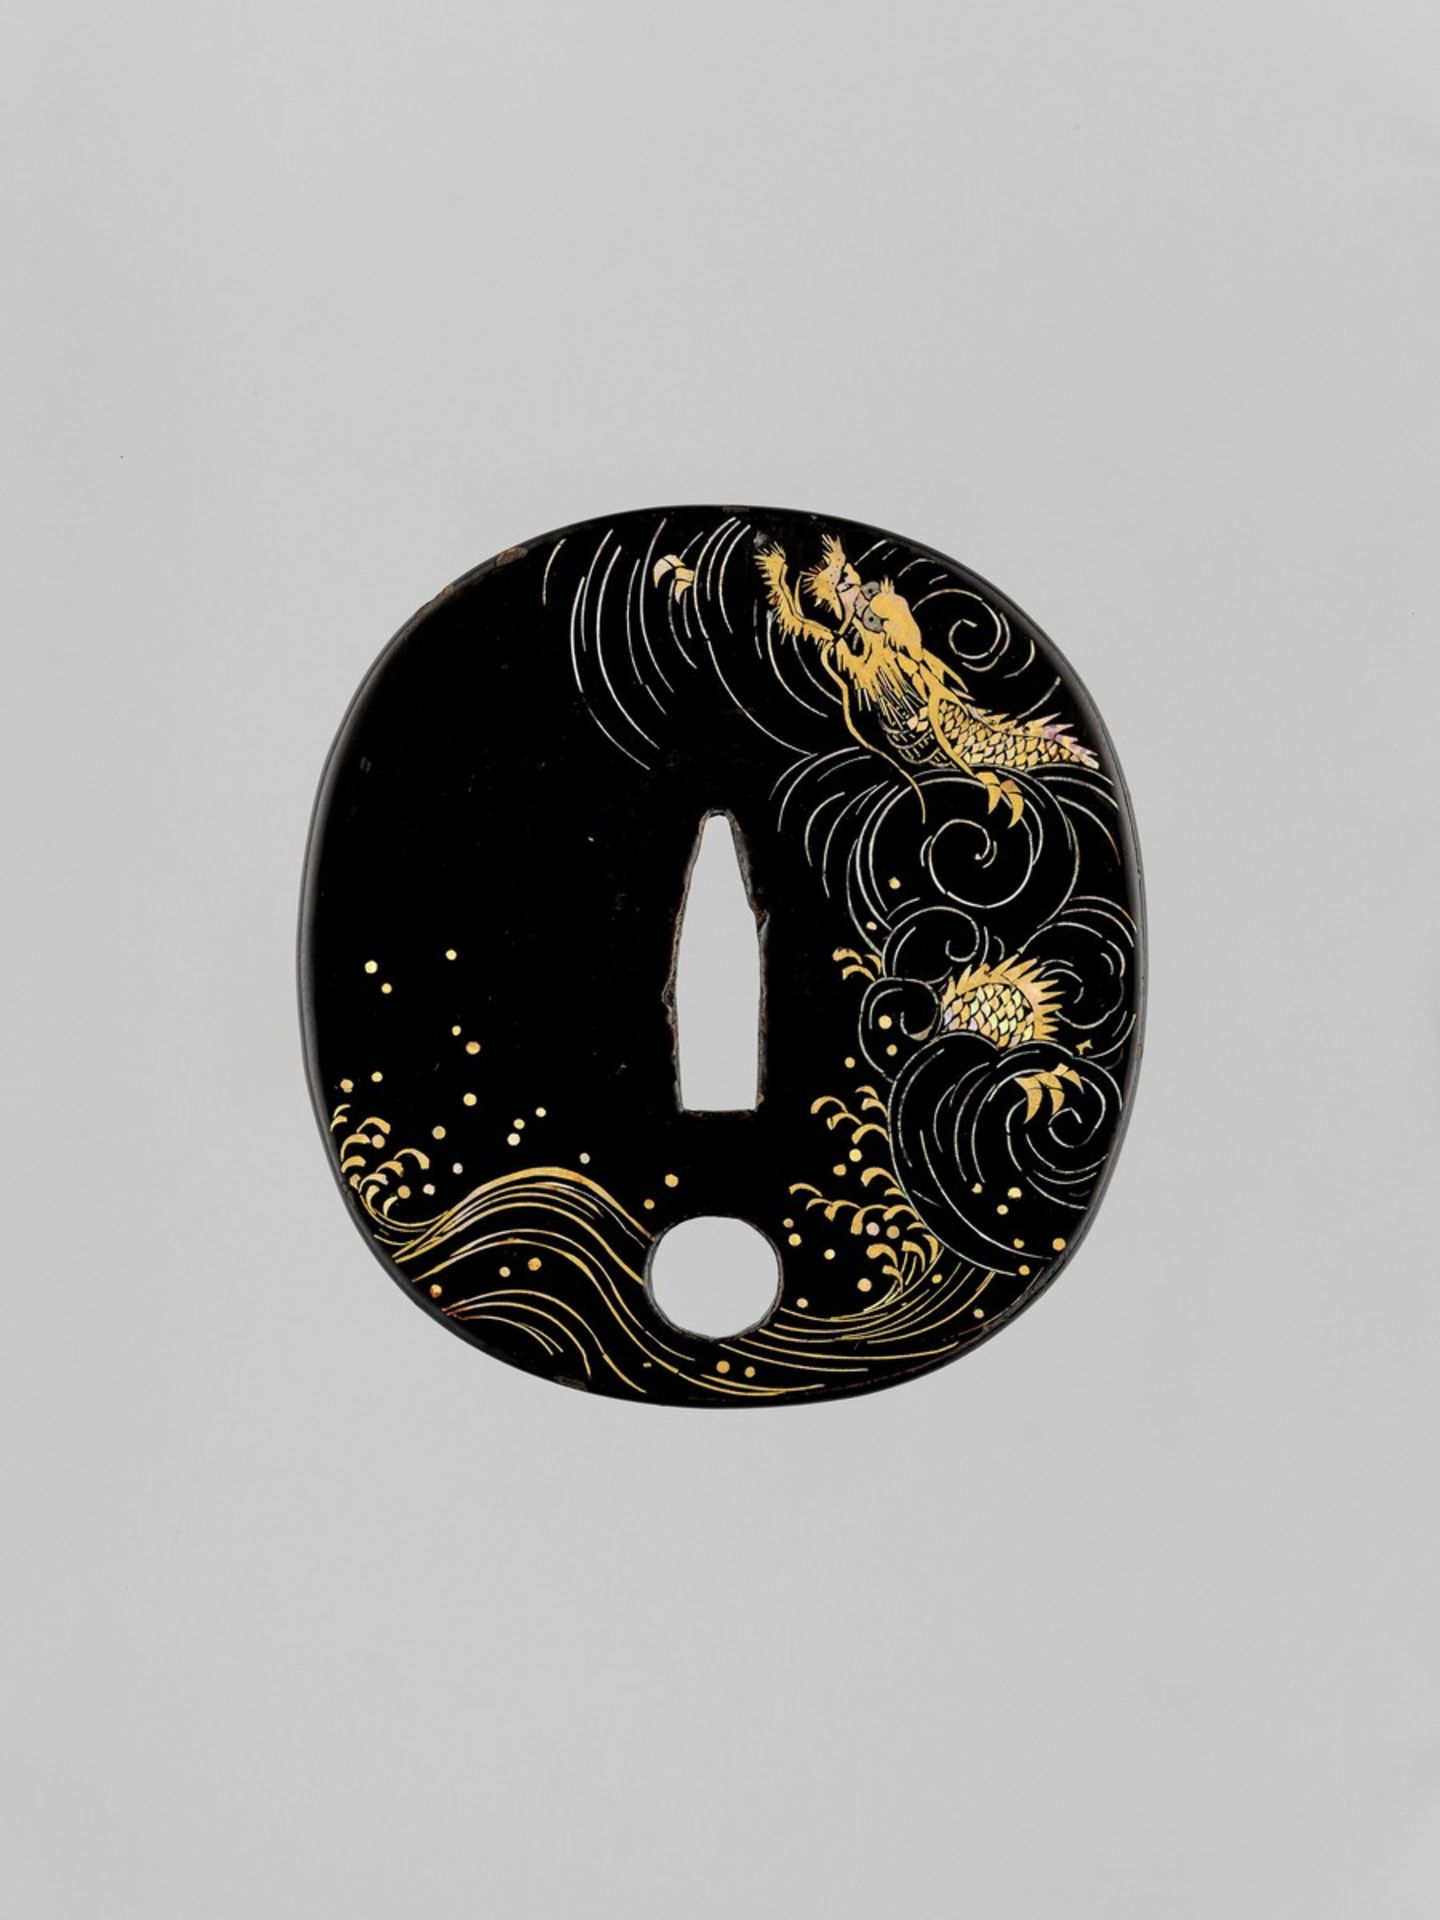 A RARE LACQUERED AND INLAID IRON TSUBA WITH DRAGON Japan, 19th century, Edo period (1615-1868)The